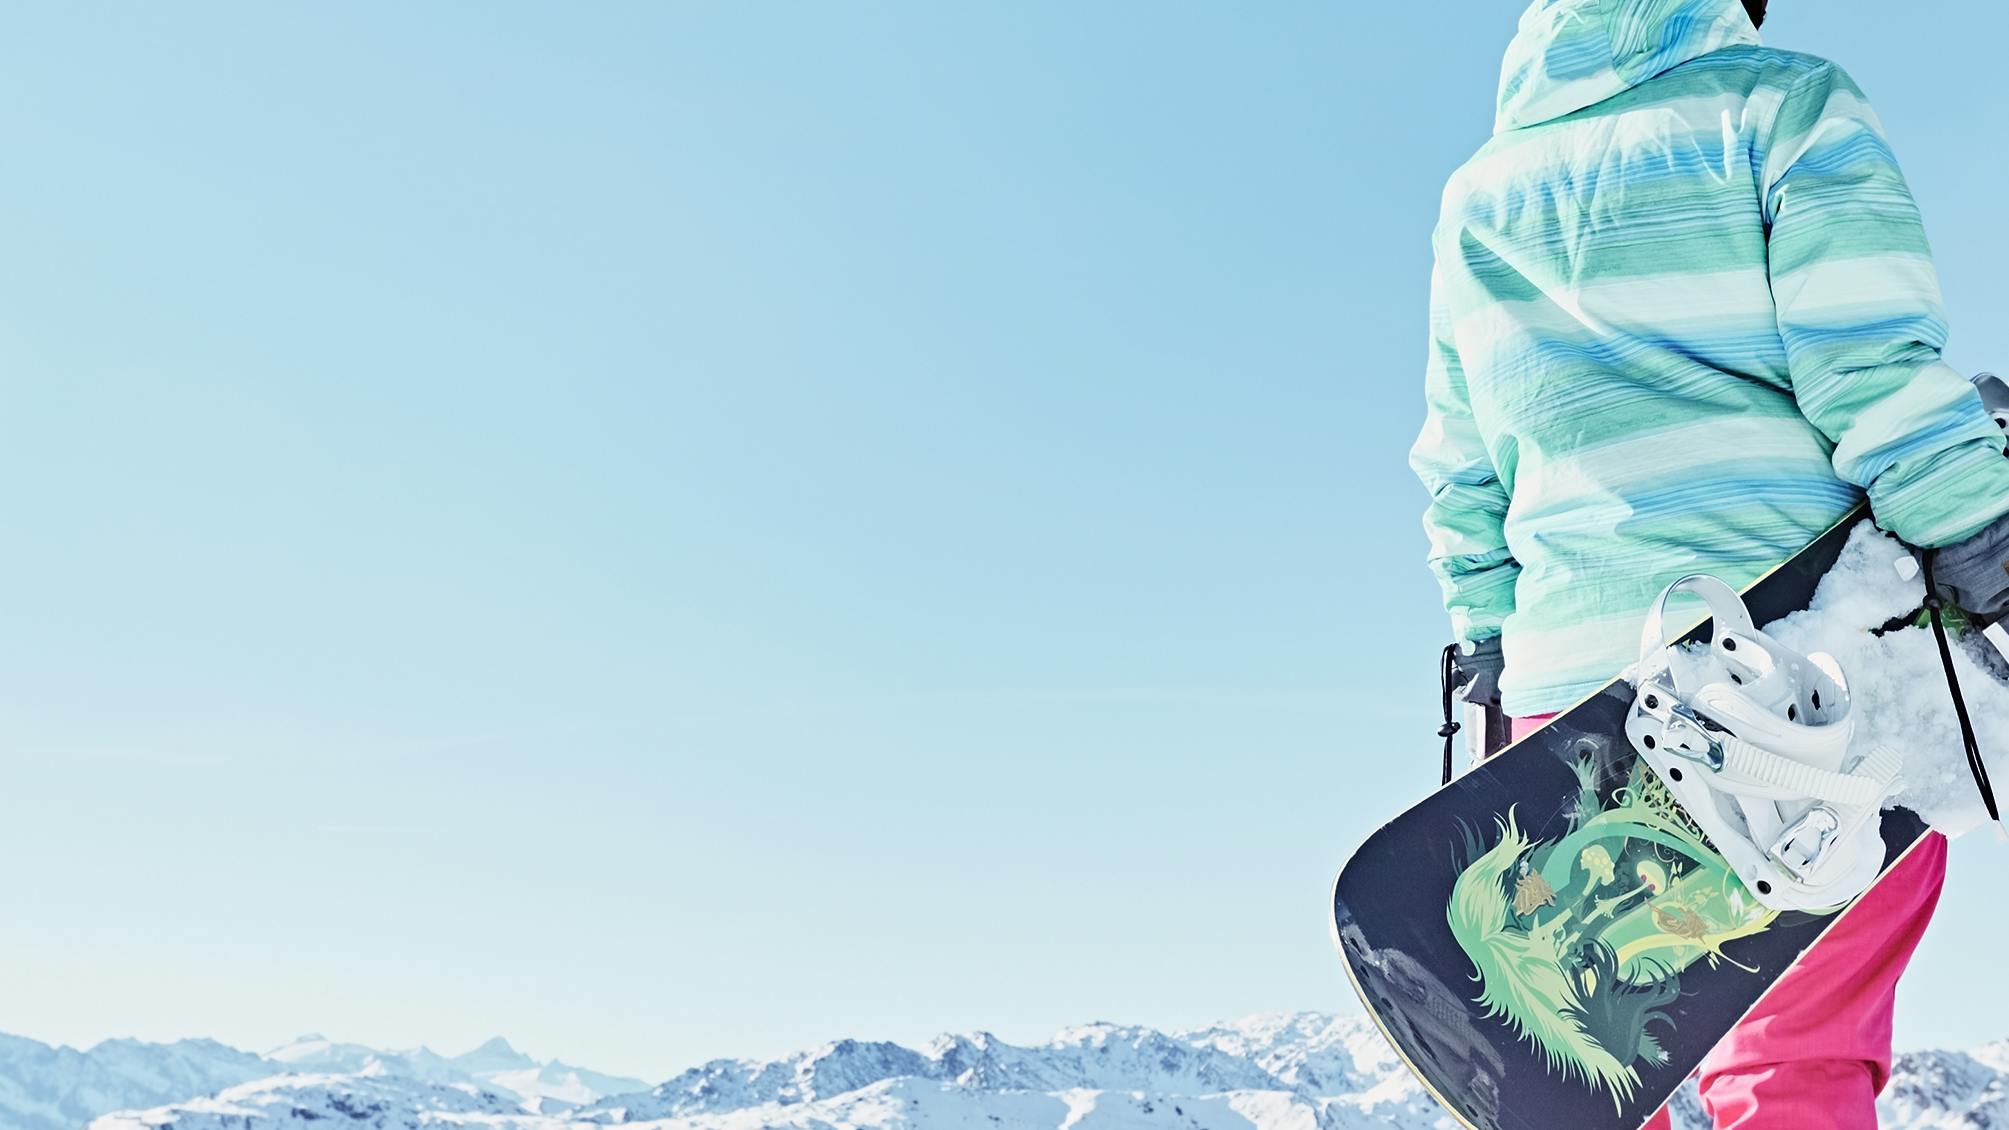 A woman standing at the top of a snowy mountain peak holding a snowboard.